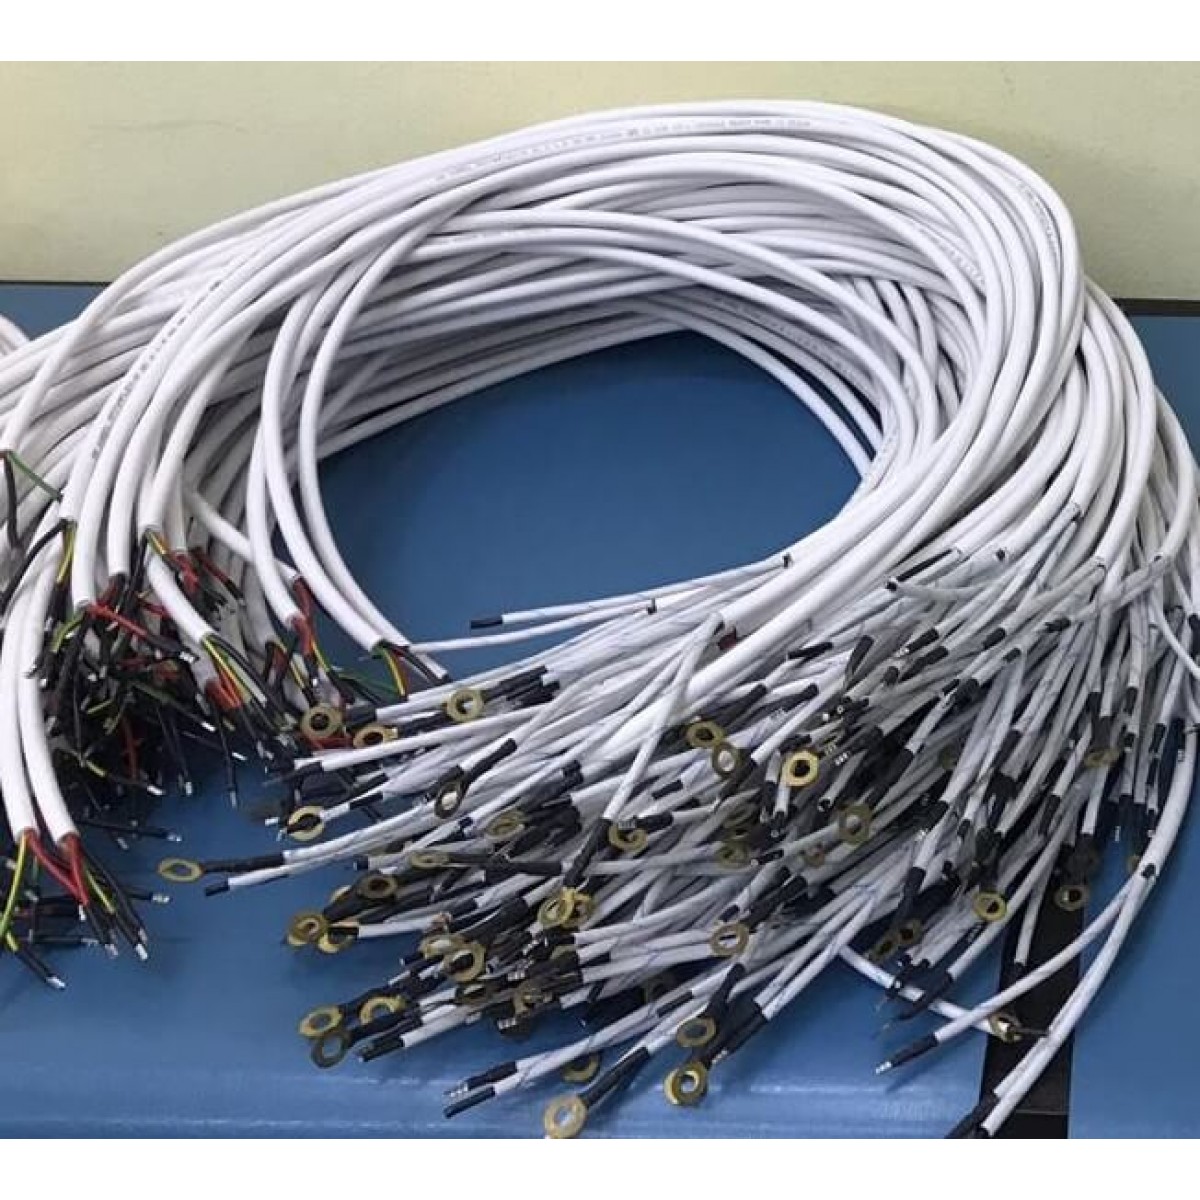 Geyser Wire Harness (Cable Harness) Manufacturer & Supplier